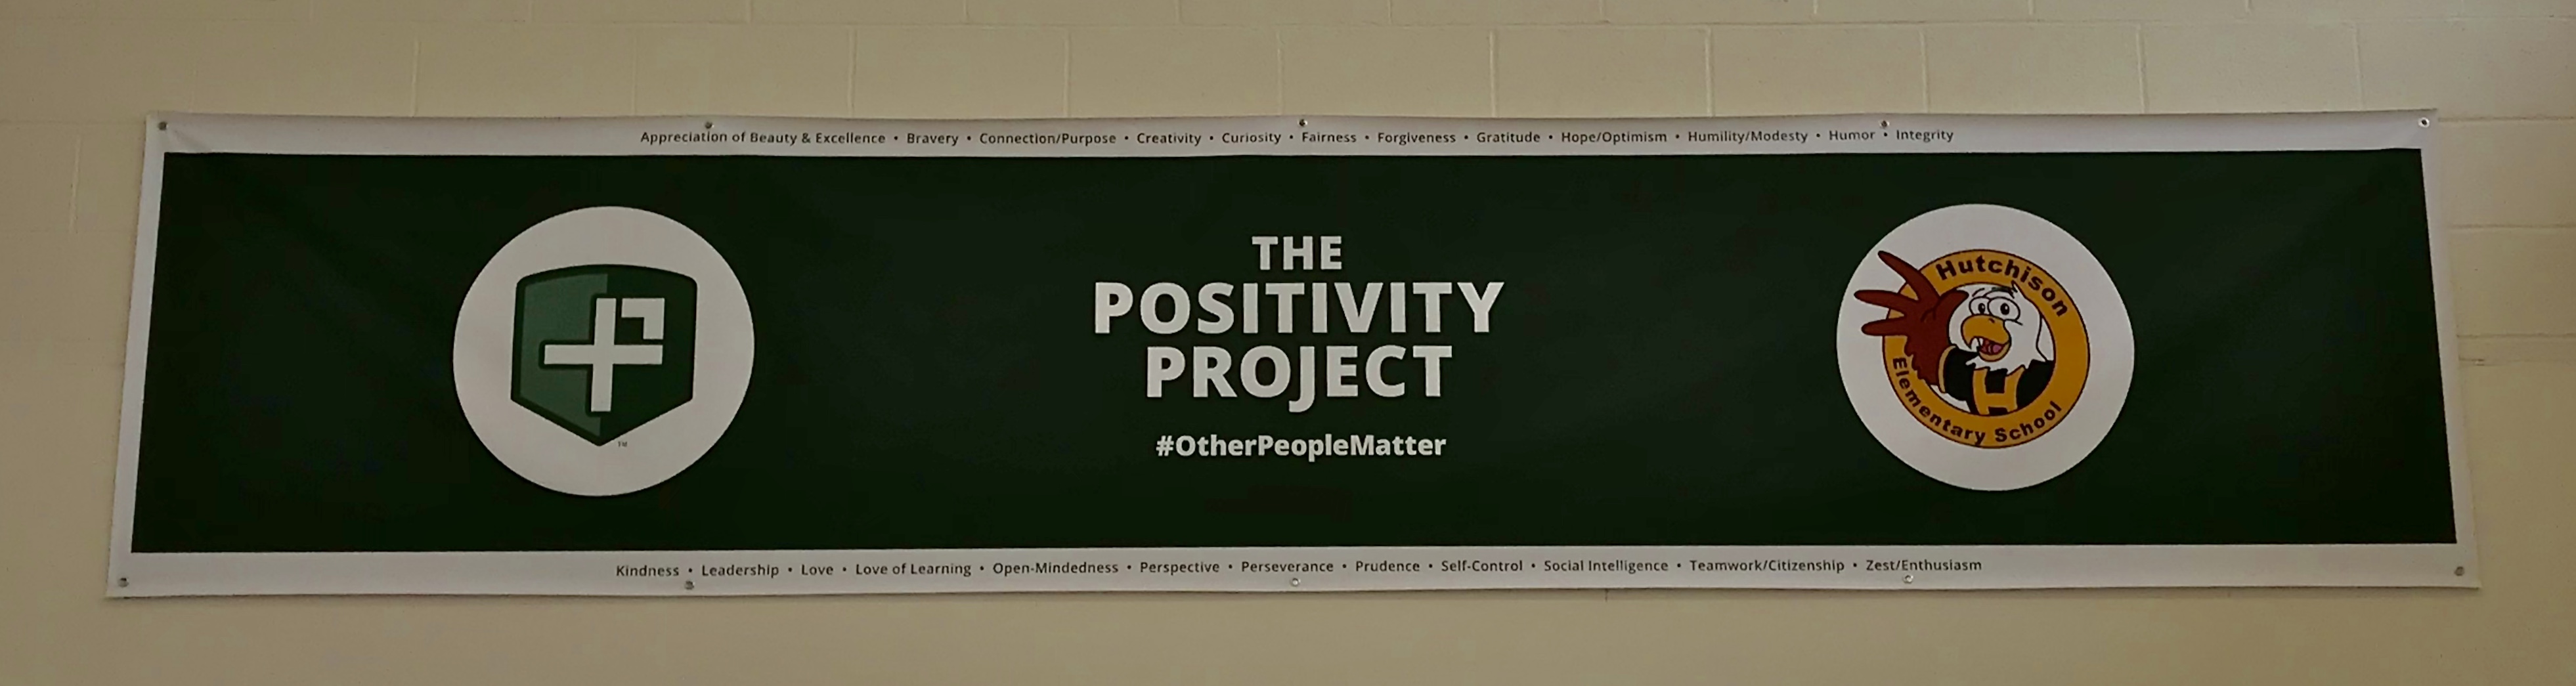 Positivity Project banner